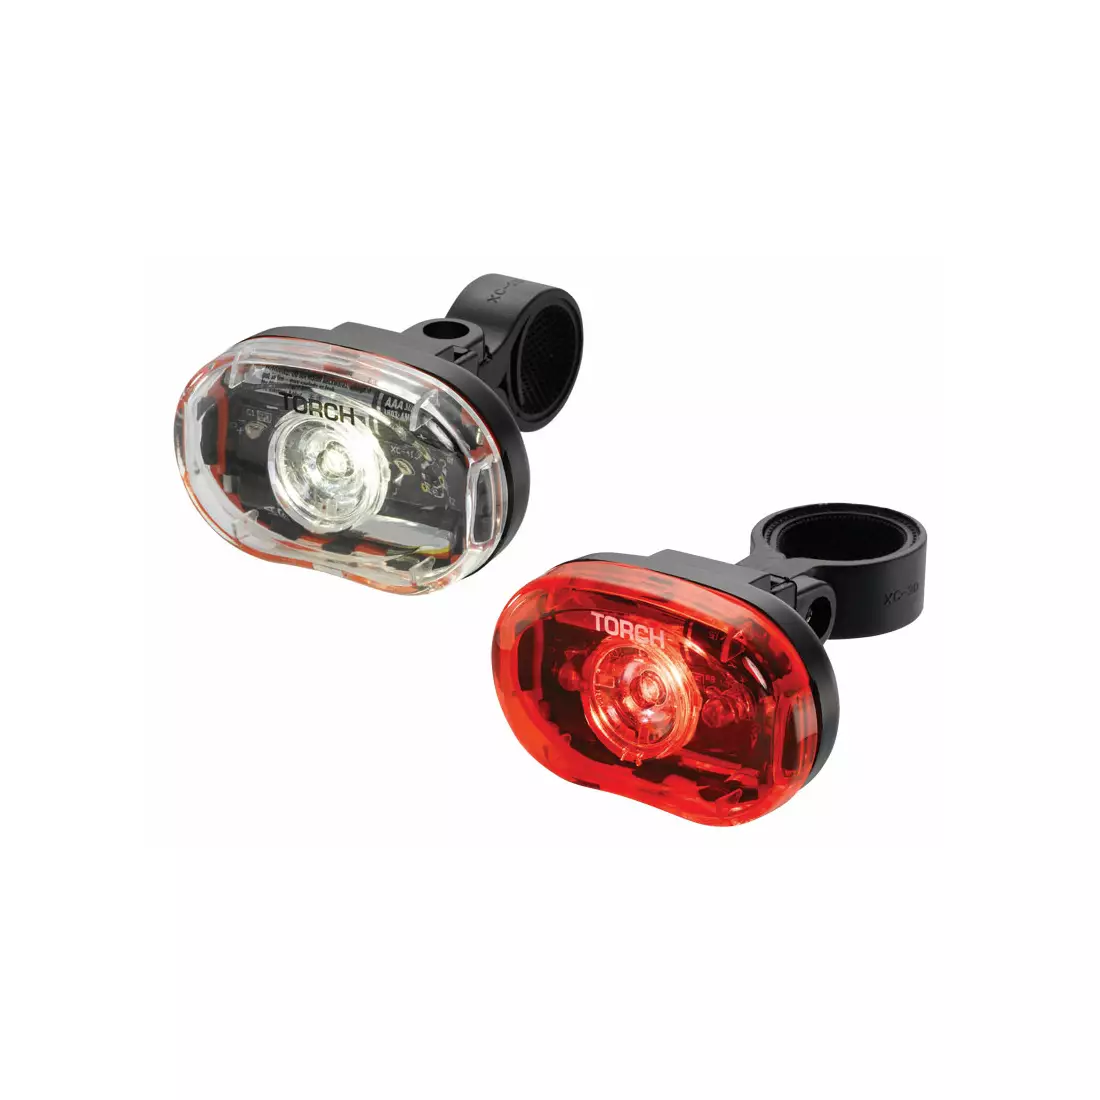 TORCH CYCLE LIGHT SET WHITE BRIGHT 0.5W + TAIL BRIGHT 0.5W TOR-54033